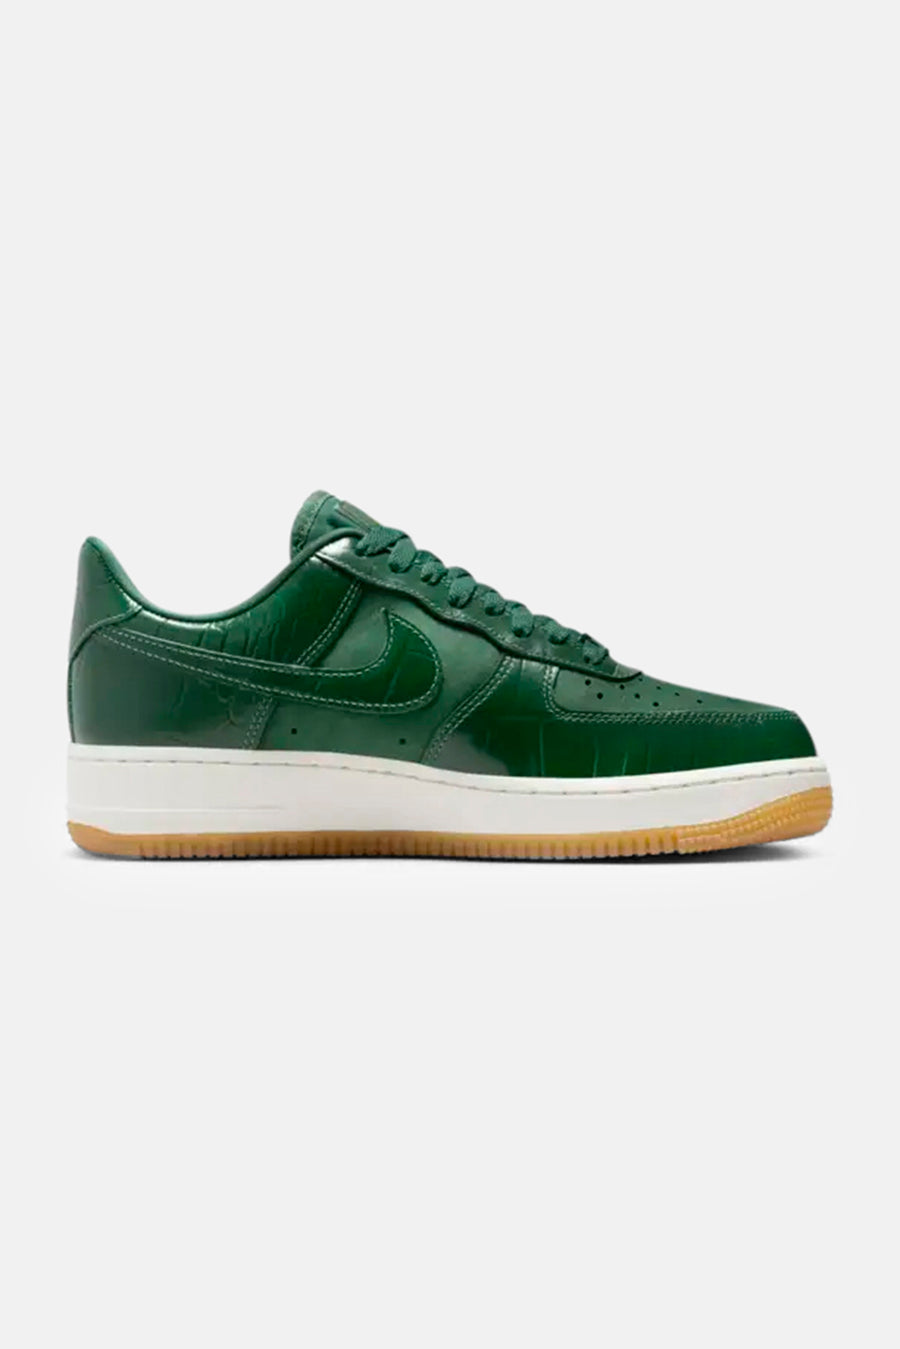 Women's Air Force 1 '07 Gorge Green